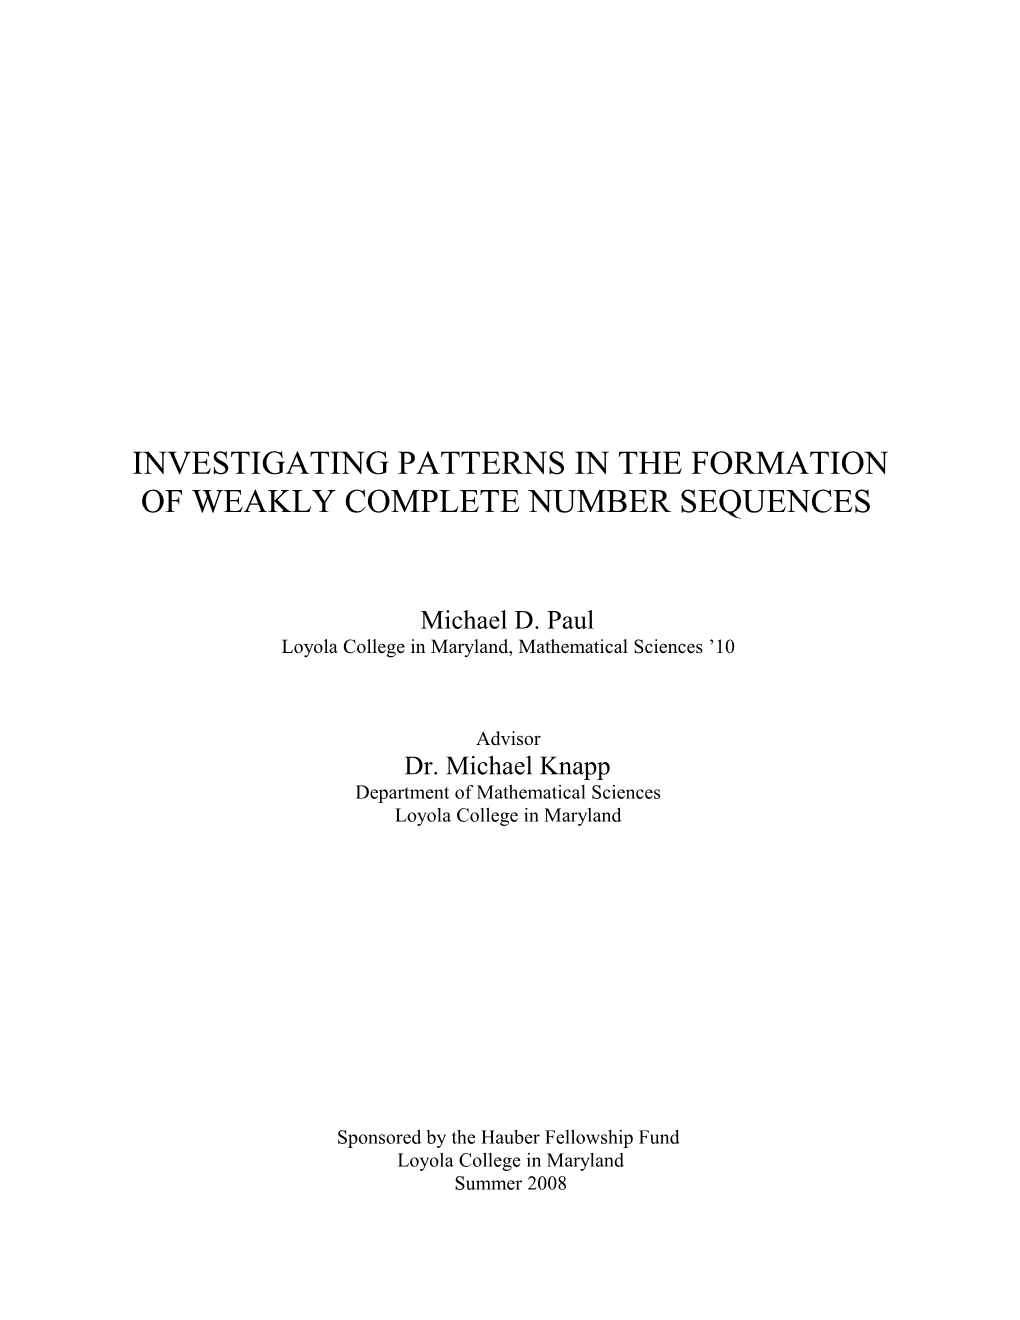 Investigating Patterns in the Formation of Weakly Complete Number Sequences